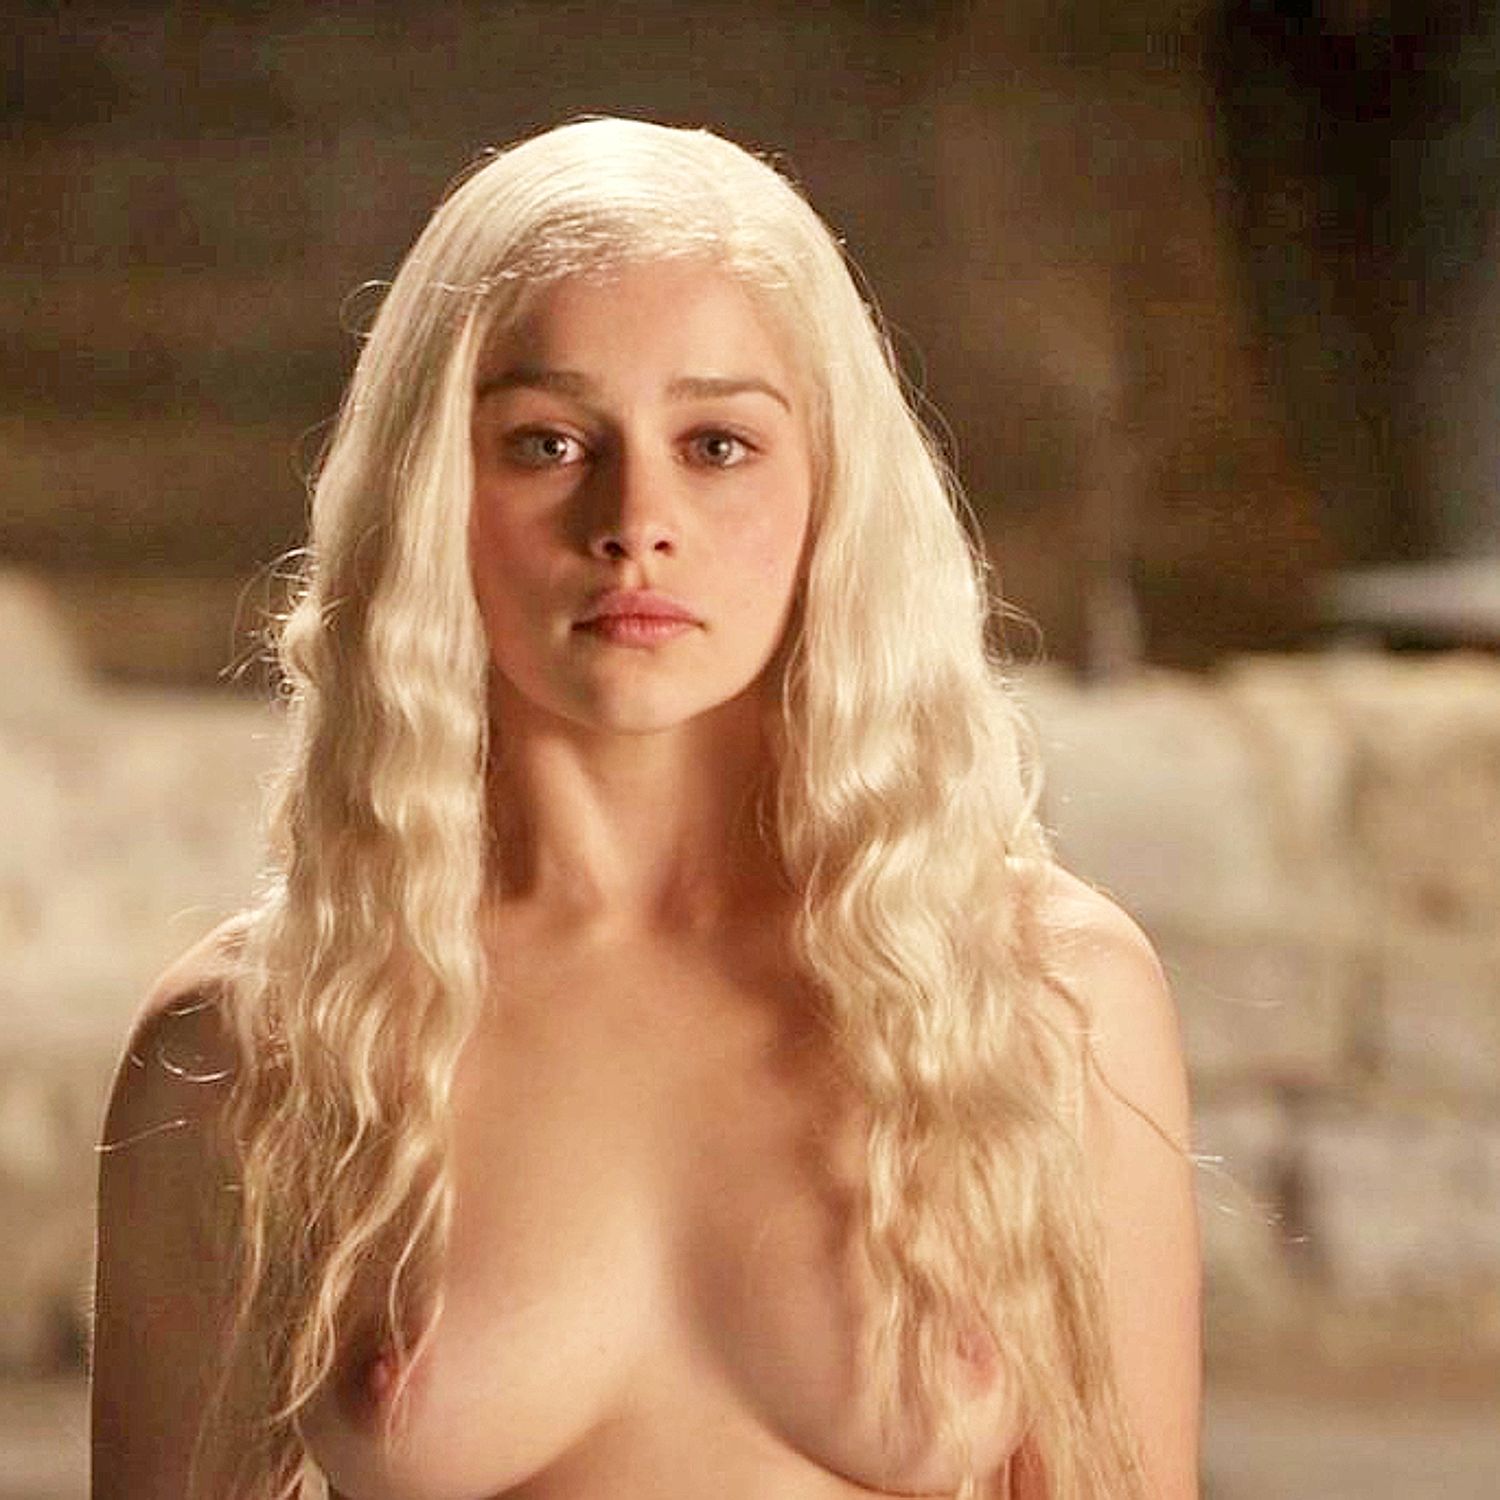 Pornhub In Trouble Over Game Of Thrones Uploads